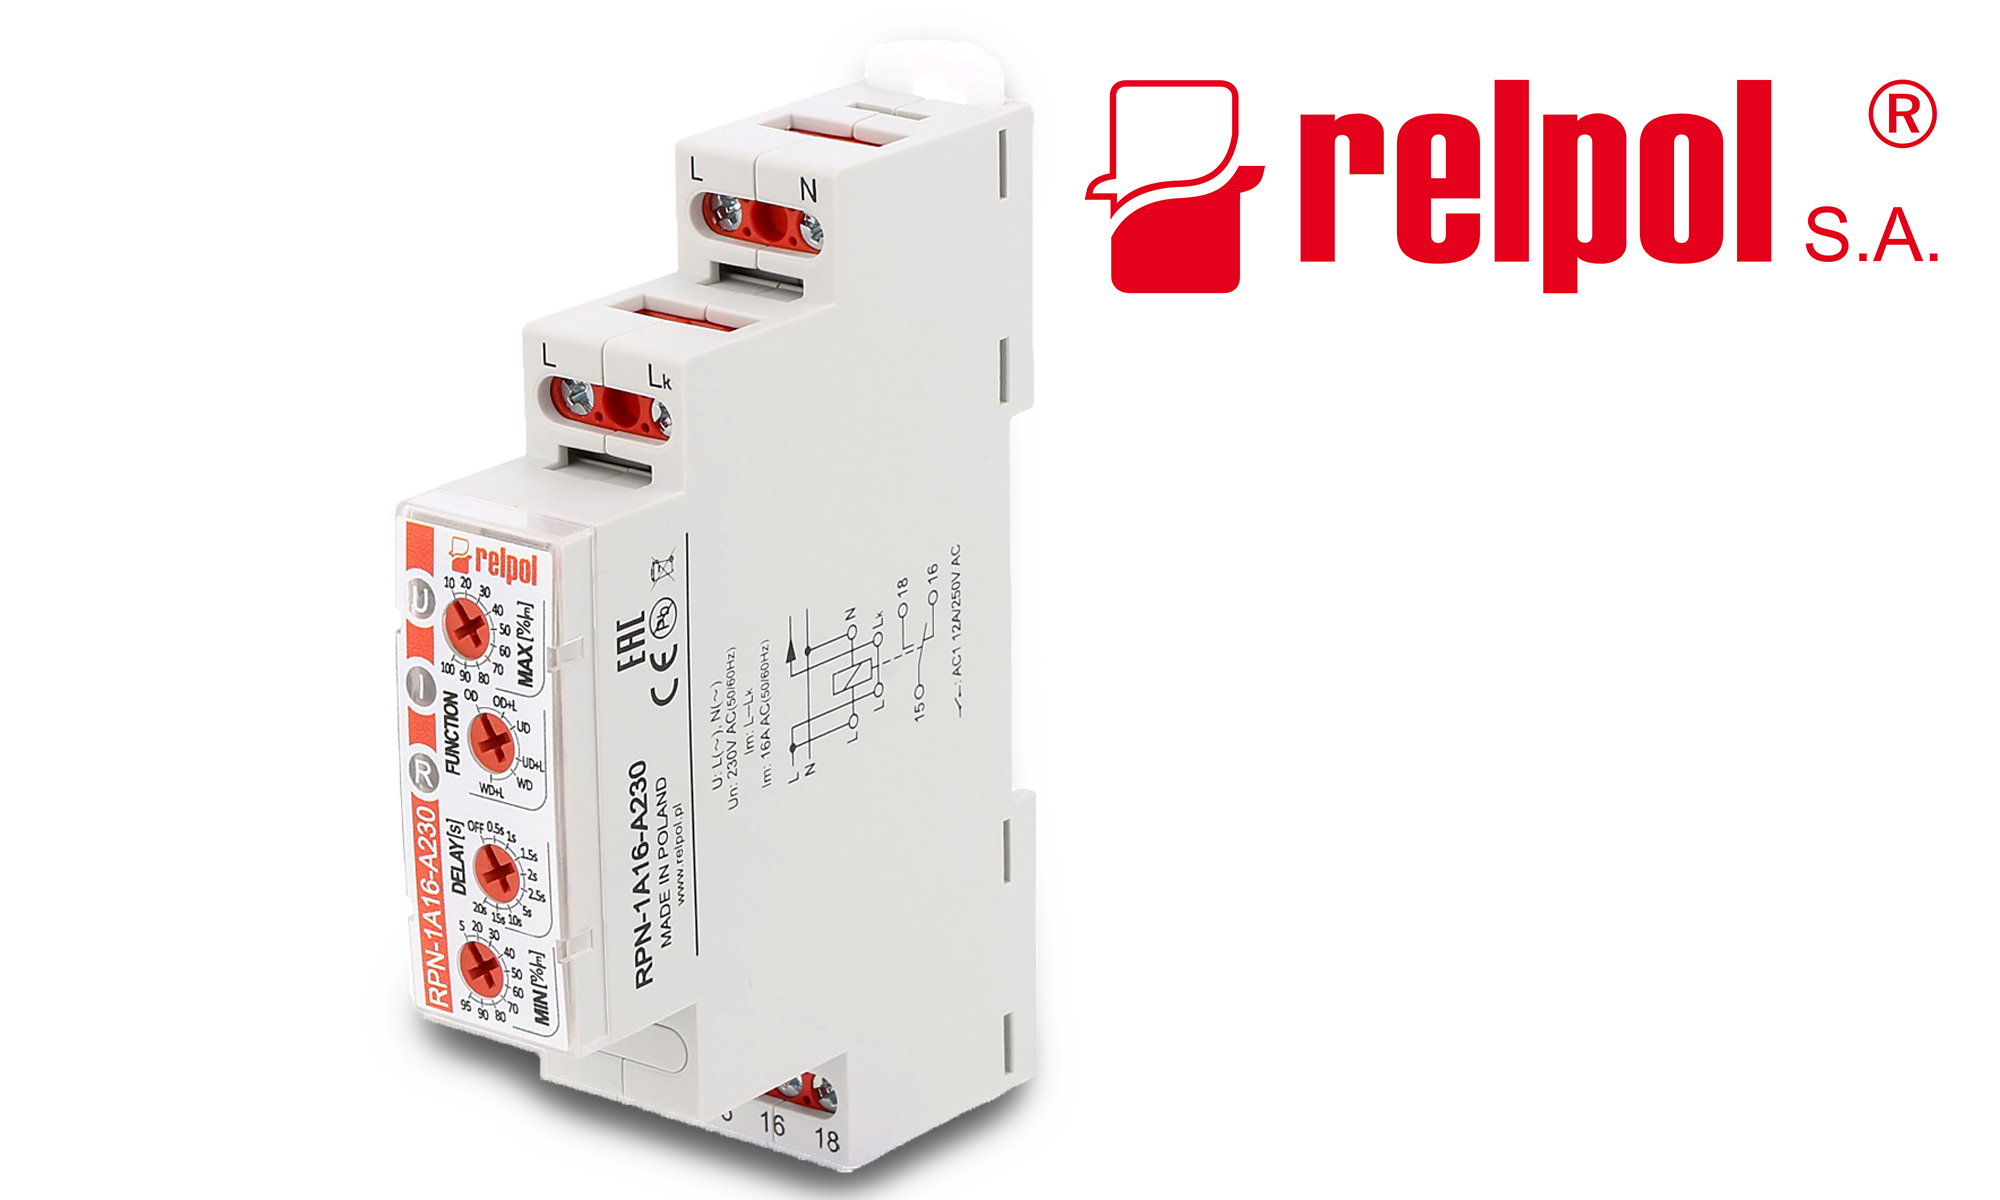 RPN monitoring relays for low voltage applications